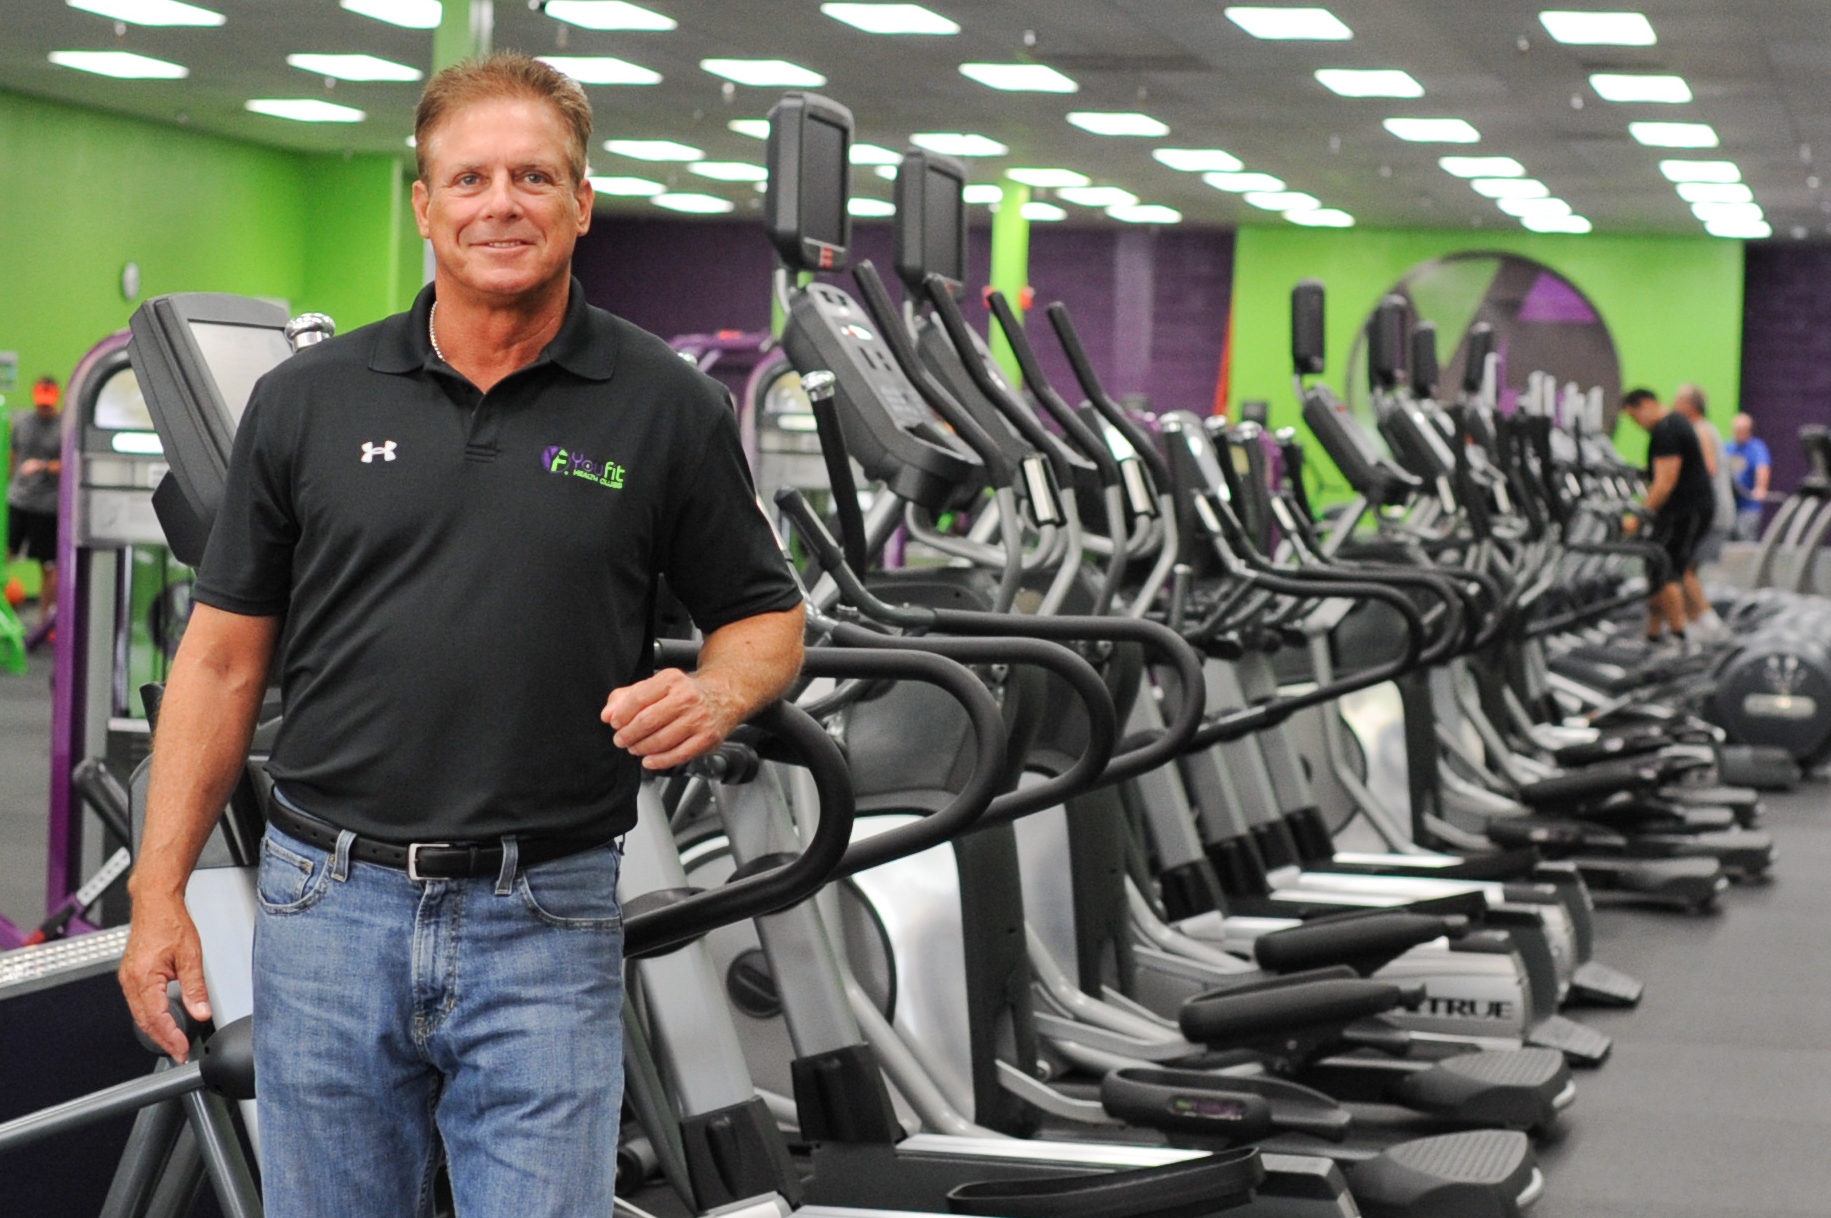 Rick Berks, the founder and president of Youfit Health Clubs